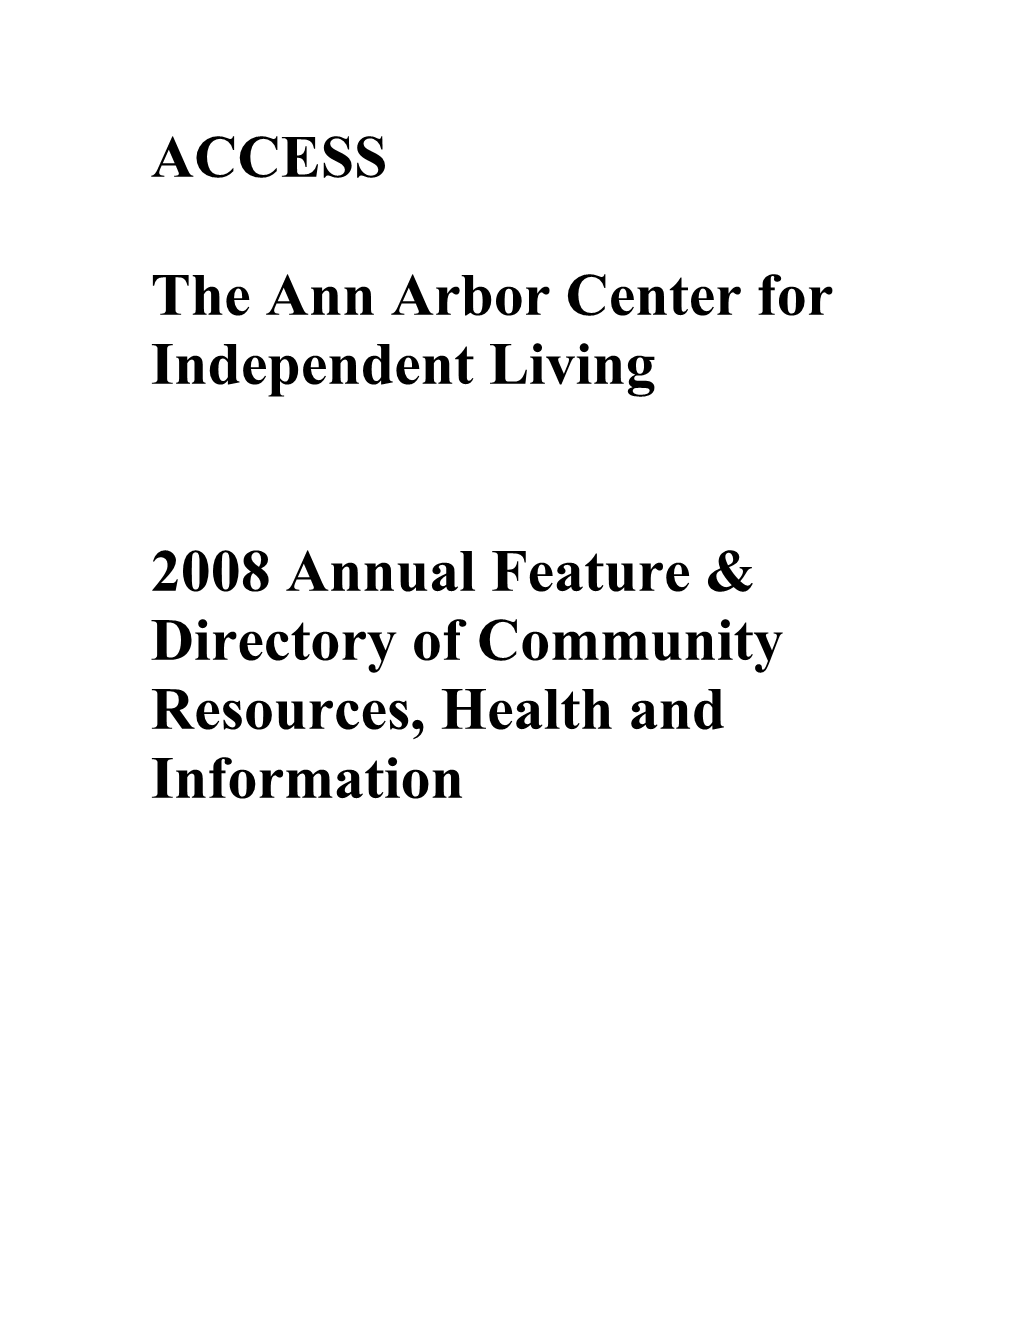 The Ann Arborcenter for Independent Living